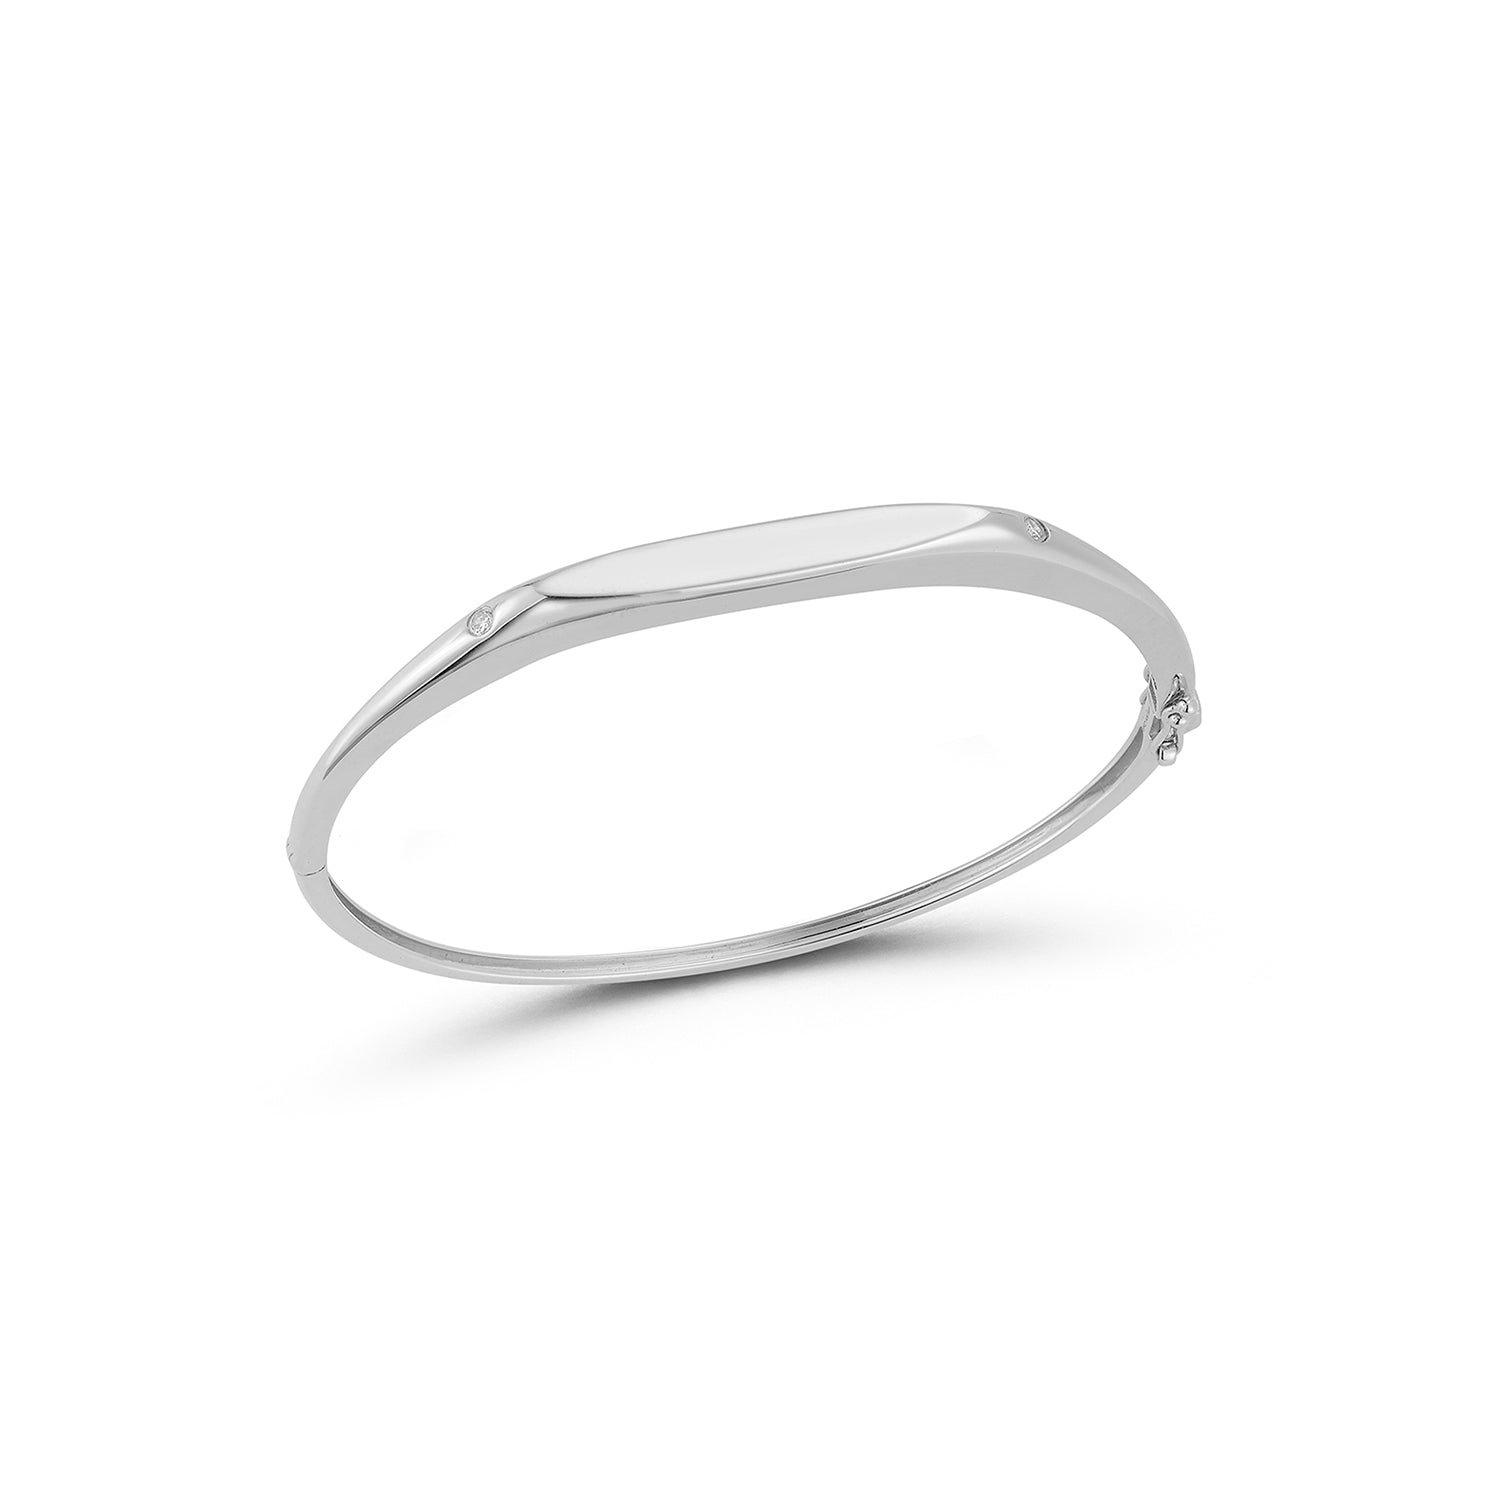 Gold Bangle with Diamond Detail in 14k white gold